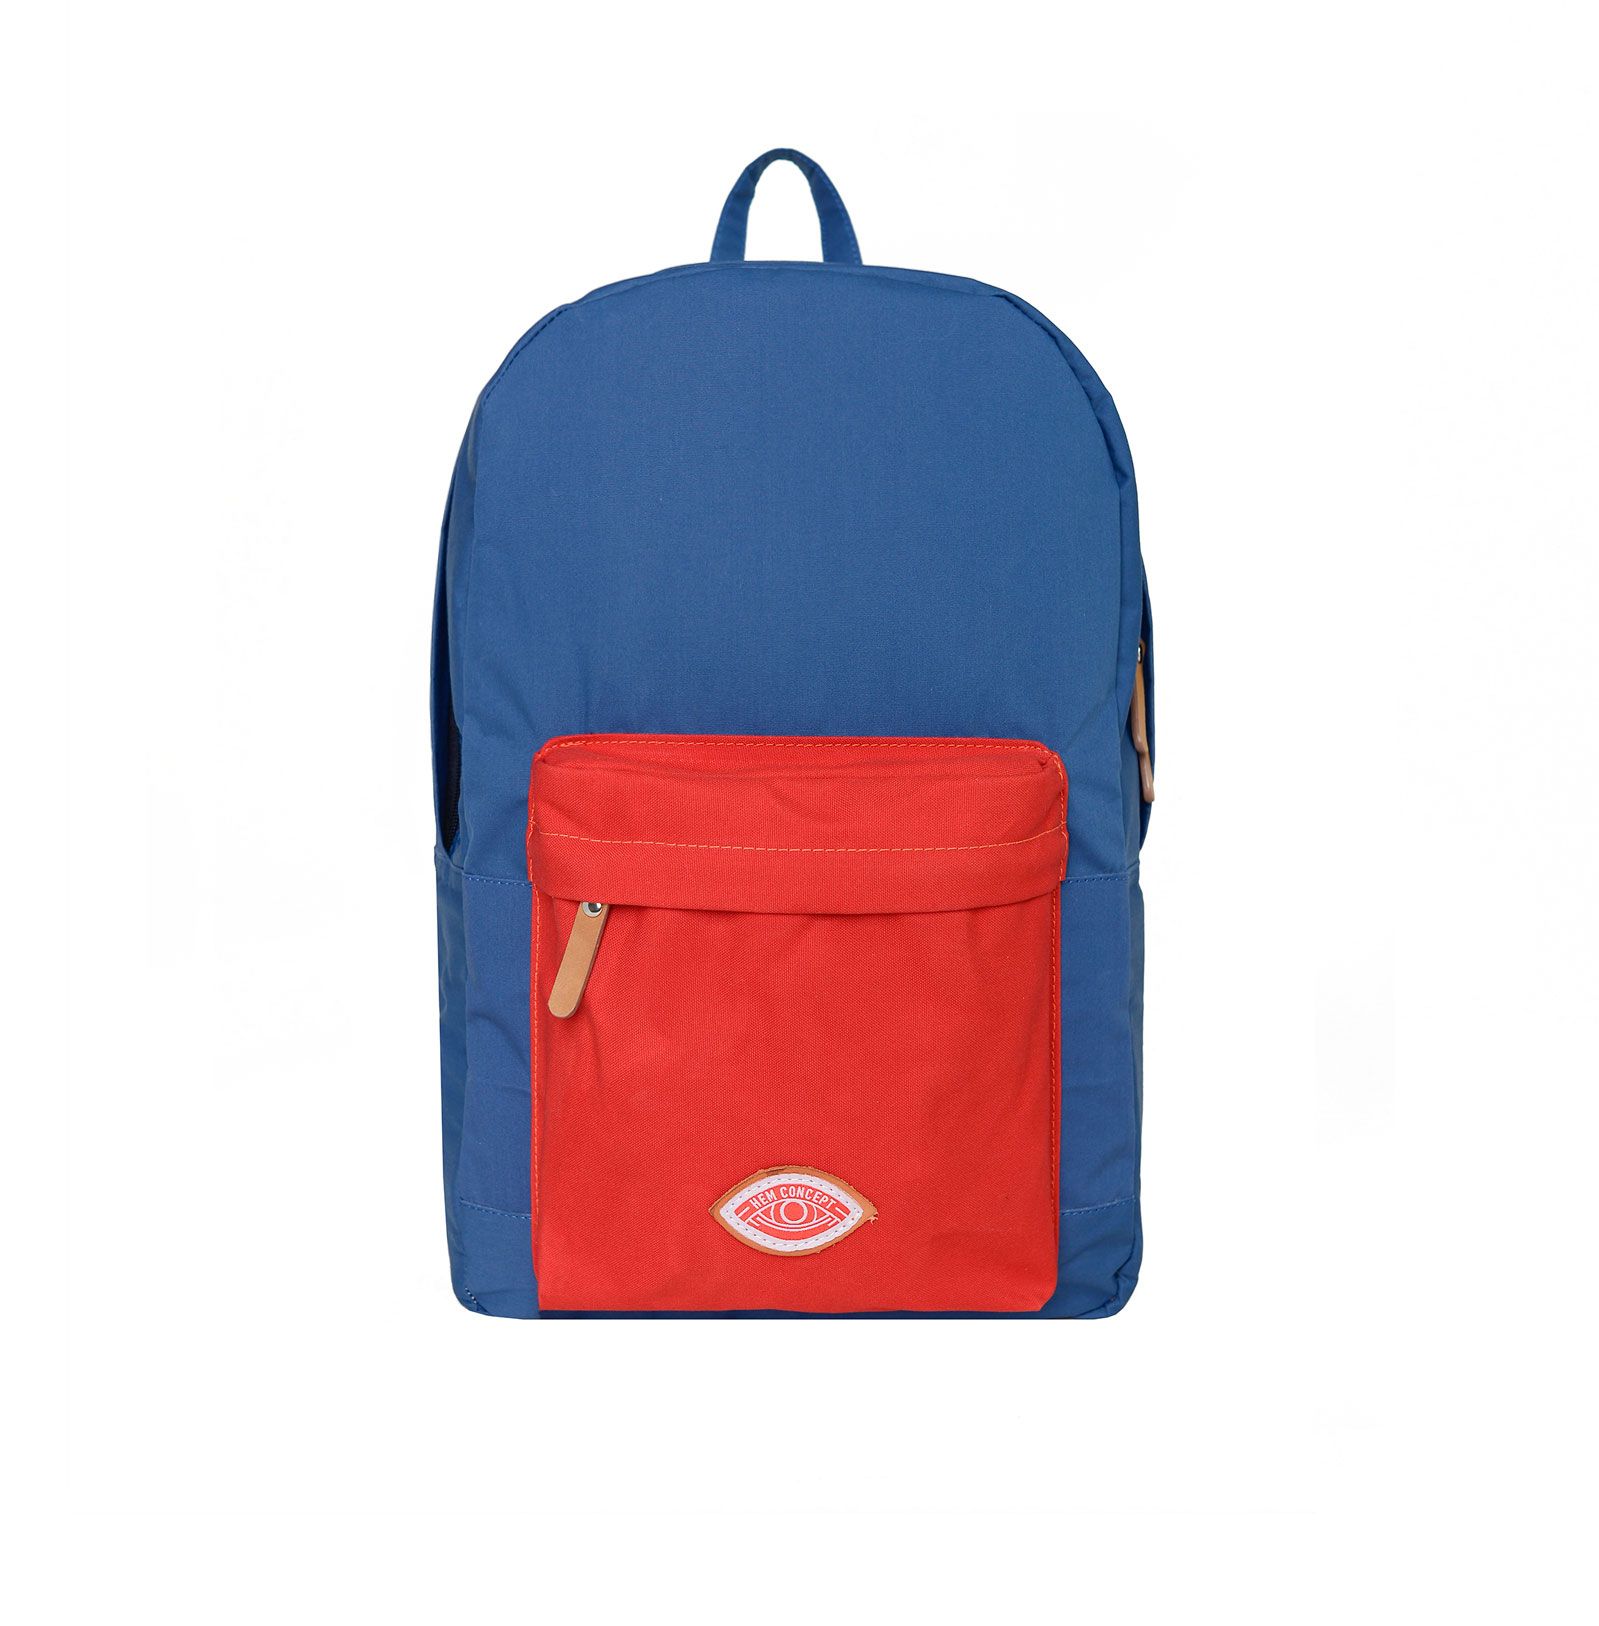 CLASSIC - NAVY/RED